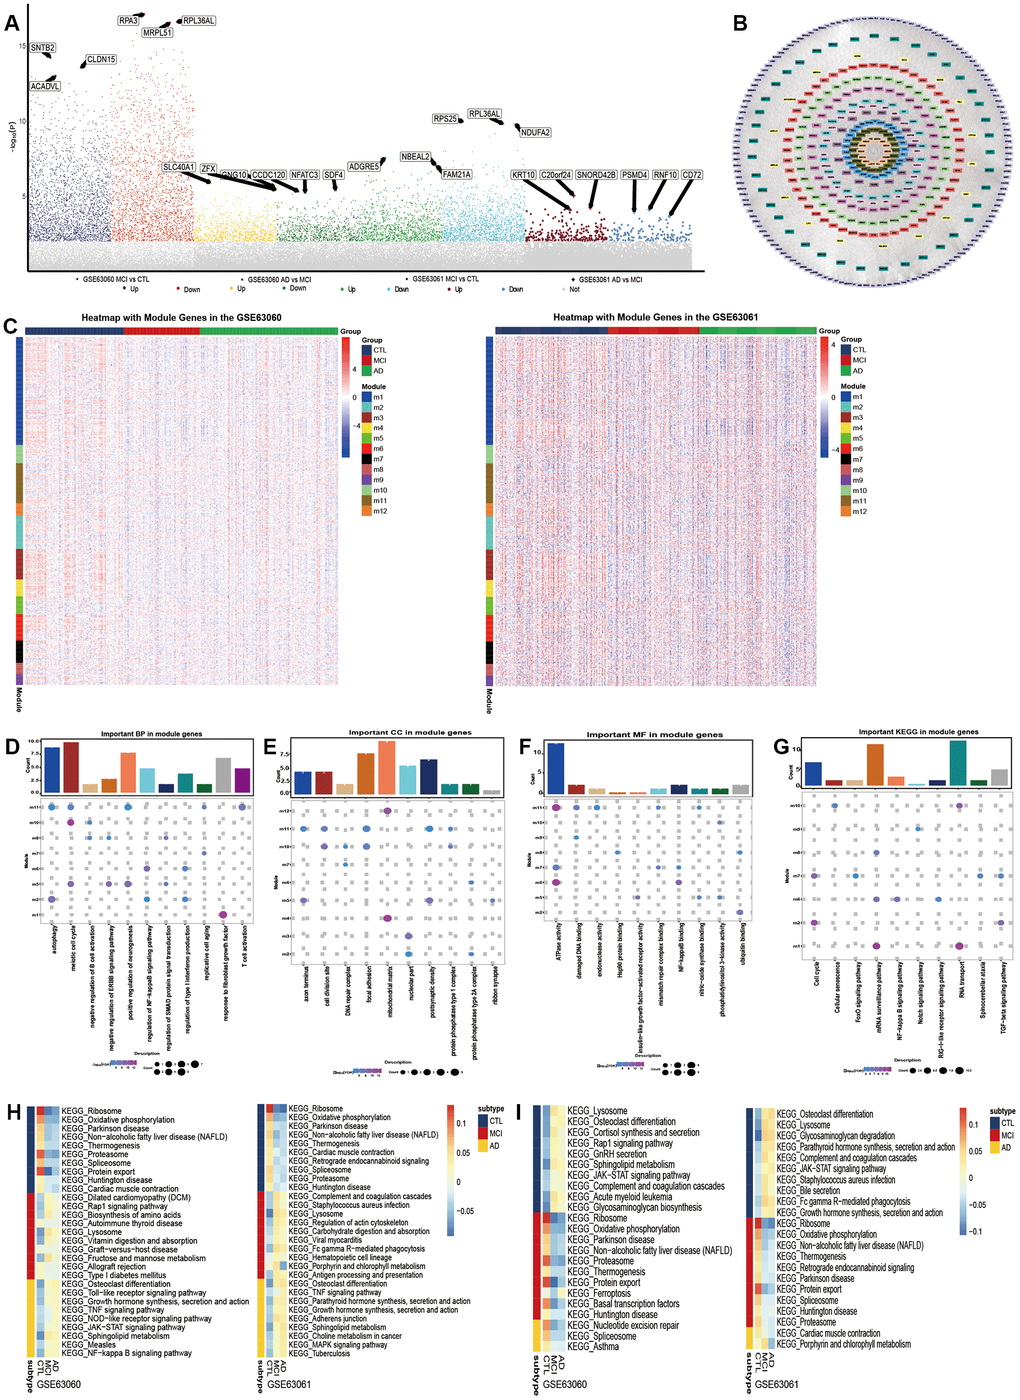 Molecular mechanism in the development of Alzheimer’s disease. (A) Differentially expressed genes between Alzheimer’s disease (AD) and mild cognitive impairment, and between mild cognitive impairment and the control. (B) The union of the two groups of the differentially expressed genes constitutes the PPI network. Each color represents a different module. (C) The expression heatmap of module genes in GSE63060 and GSE63061. The biological functions (D), cellular components (E) and molecular functions (F) of the modular genes. (G) The KEGG pathway of module genes. From control to mild cognitive impairment and then to AD, the signal pathway was continuously up-regulated (H) or down-regulated (I).